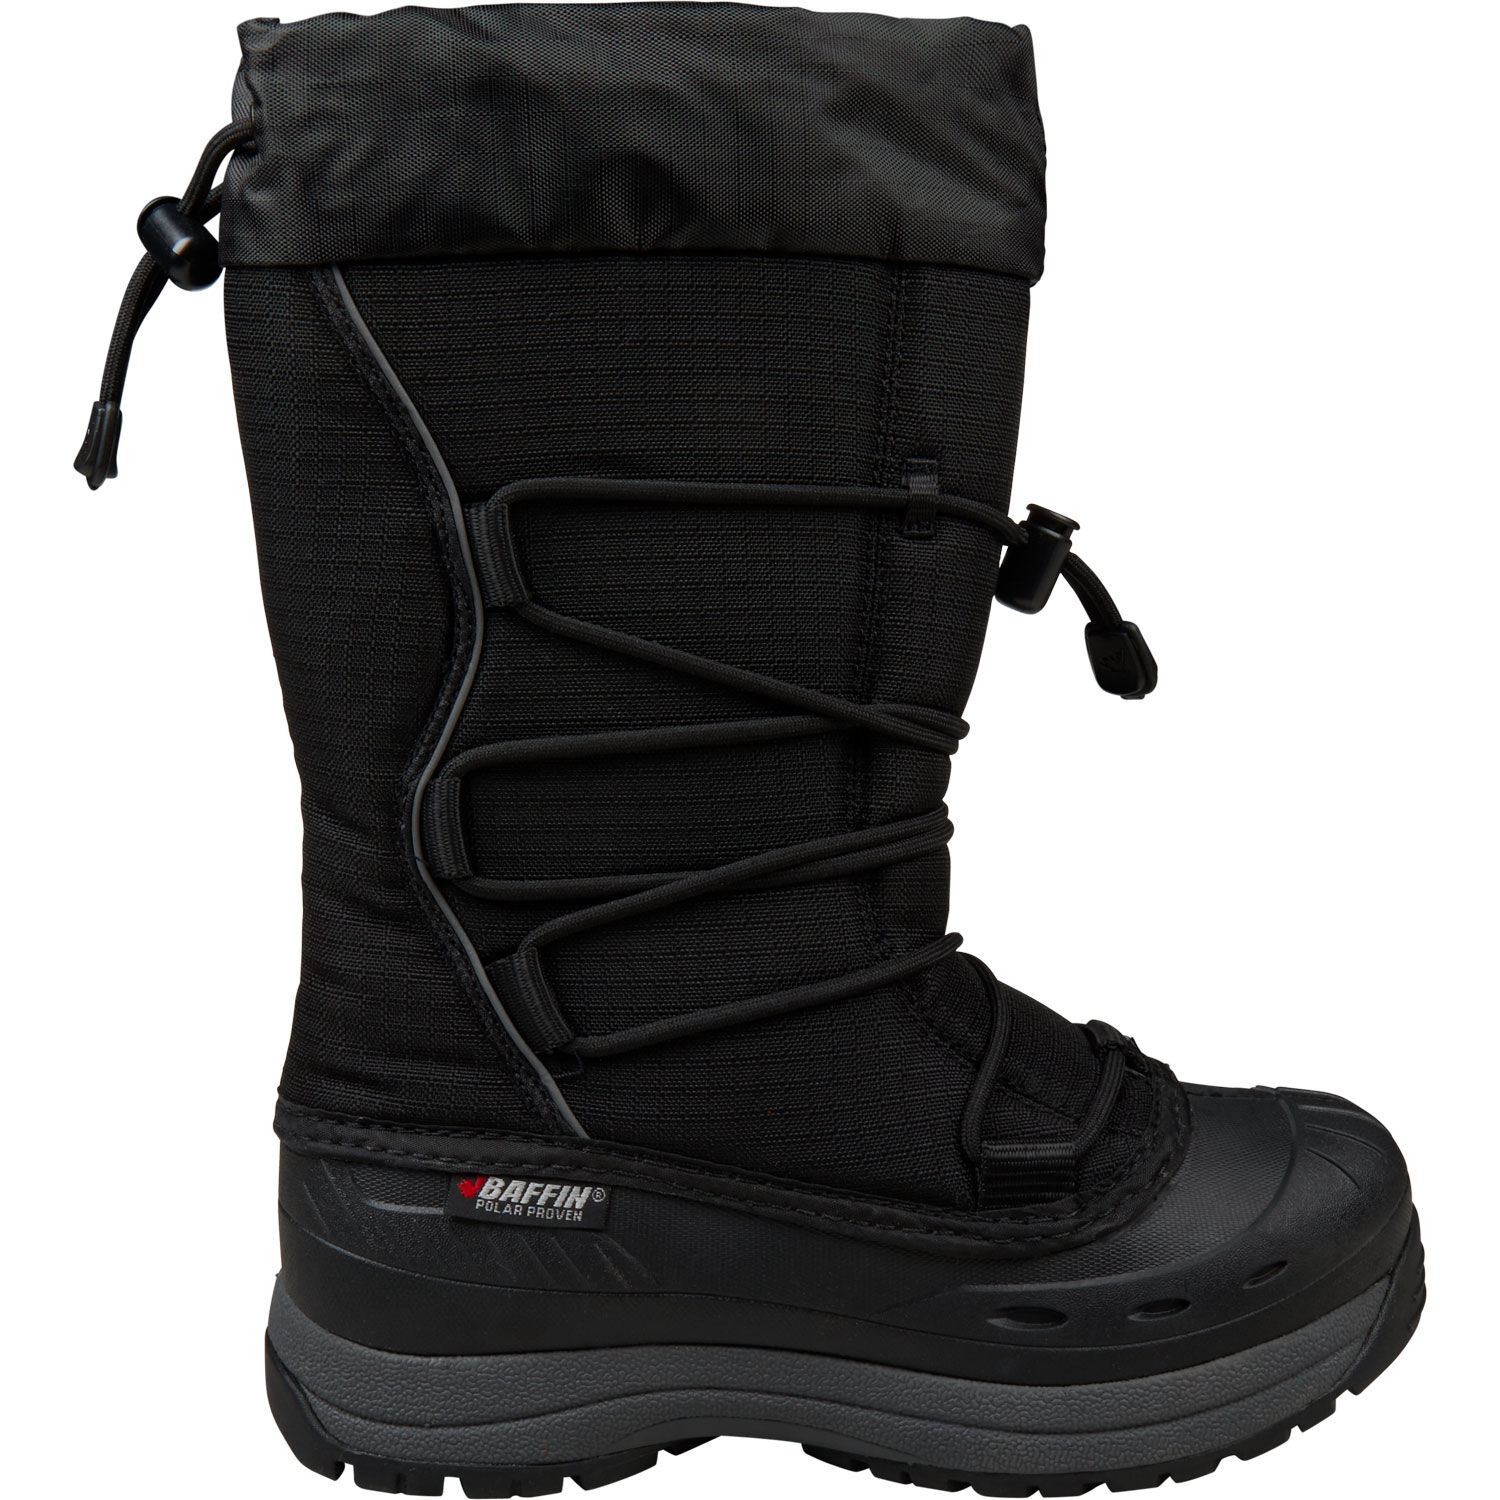 Women's Baffin Snogoose Boots | Duluth Trading Company